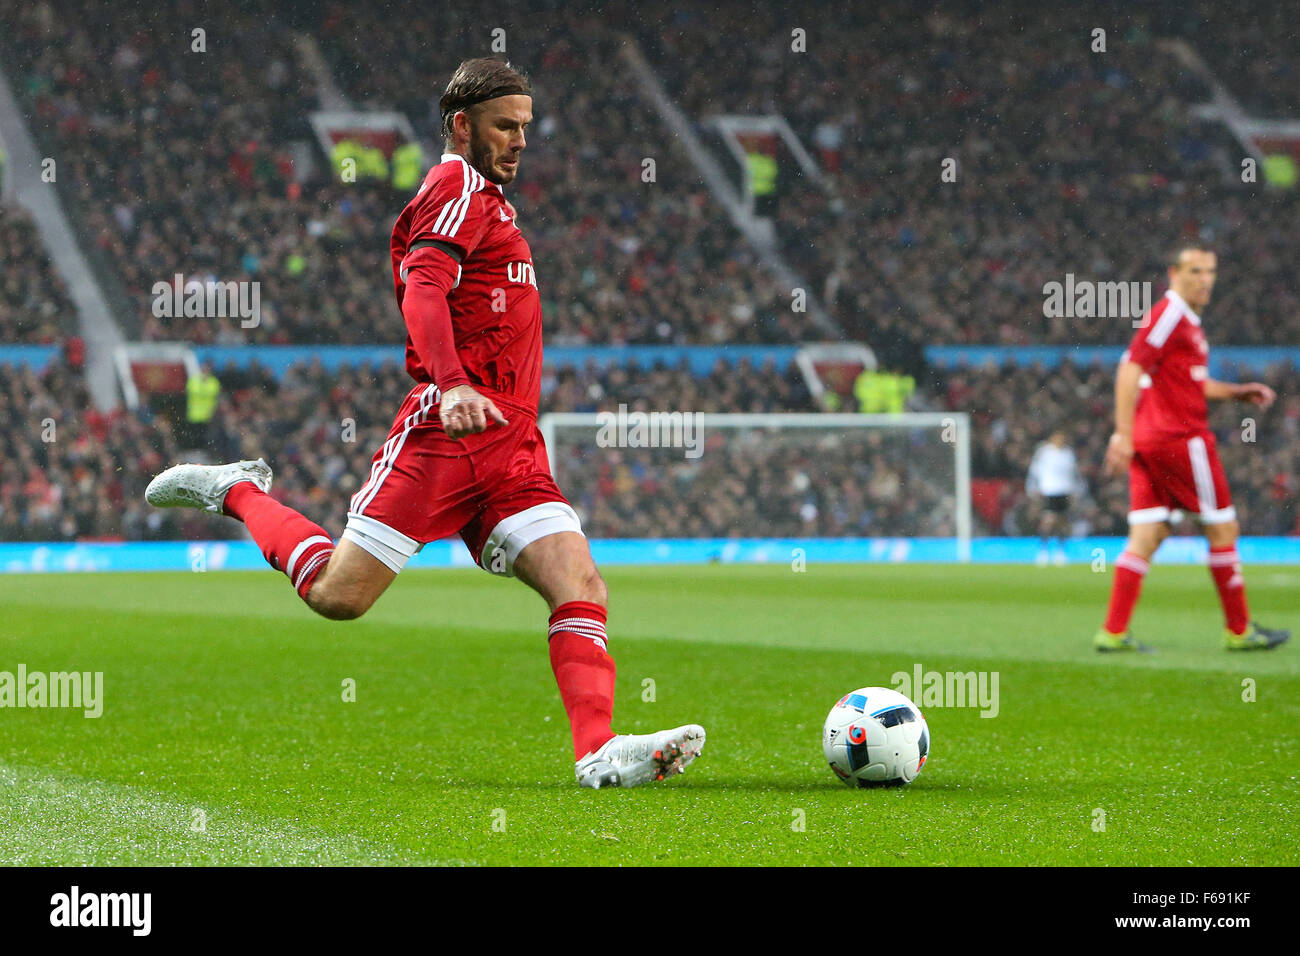 Old Trafford, Manchester, UK. 14th Nov, 2015. Unicef Match for Children. GB and NI XI versus Rest of the World XI. David Beckham in action Credit:  Action Plus Sports/Alamy Live News Stock Photo